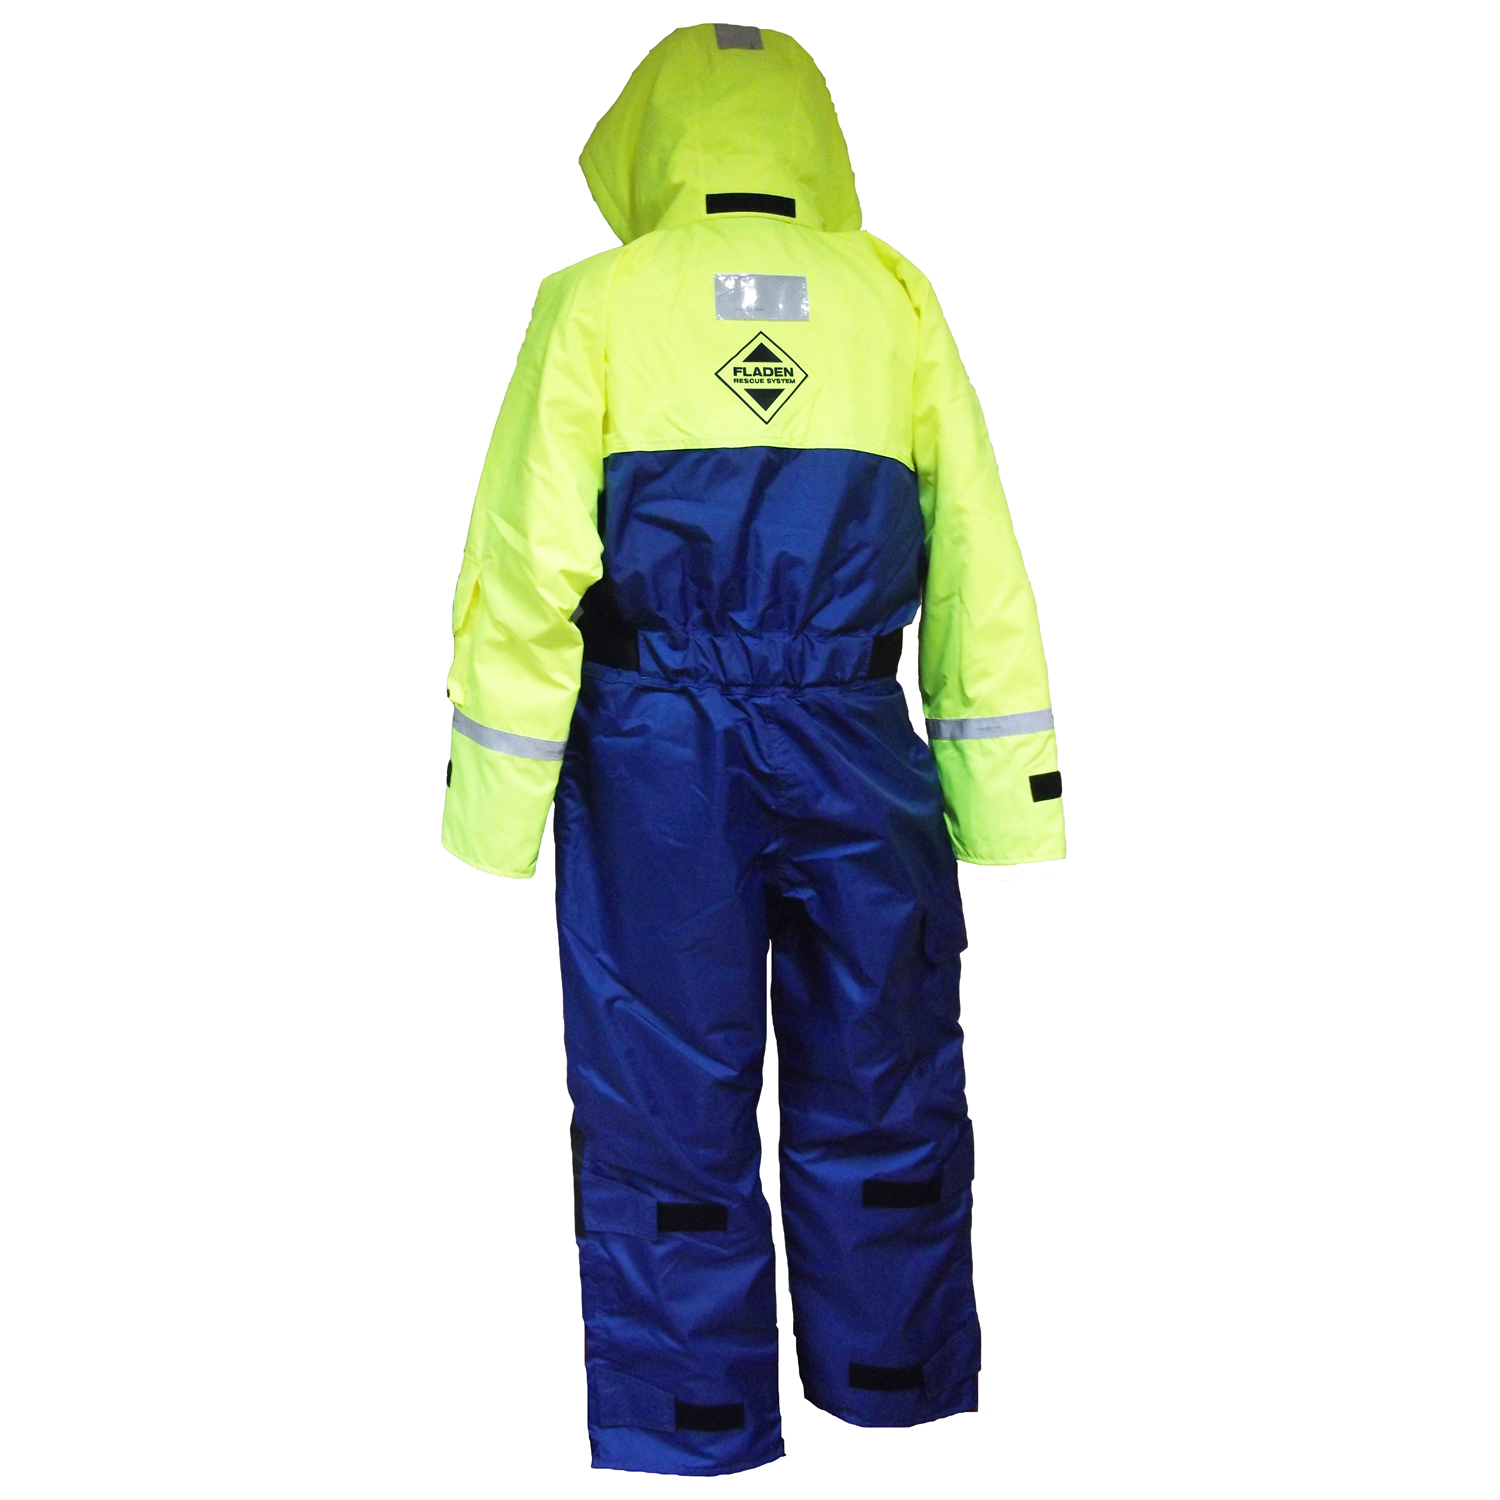 Marine Buoyancy and Thermal Protection Blue and Yellow SCANDIA Flotation Jacket EN 393 Certified X-Small FLADEN RESCUE SYSTEM 22-846BGXS 